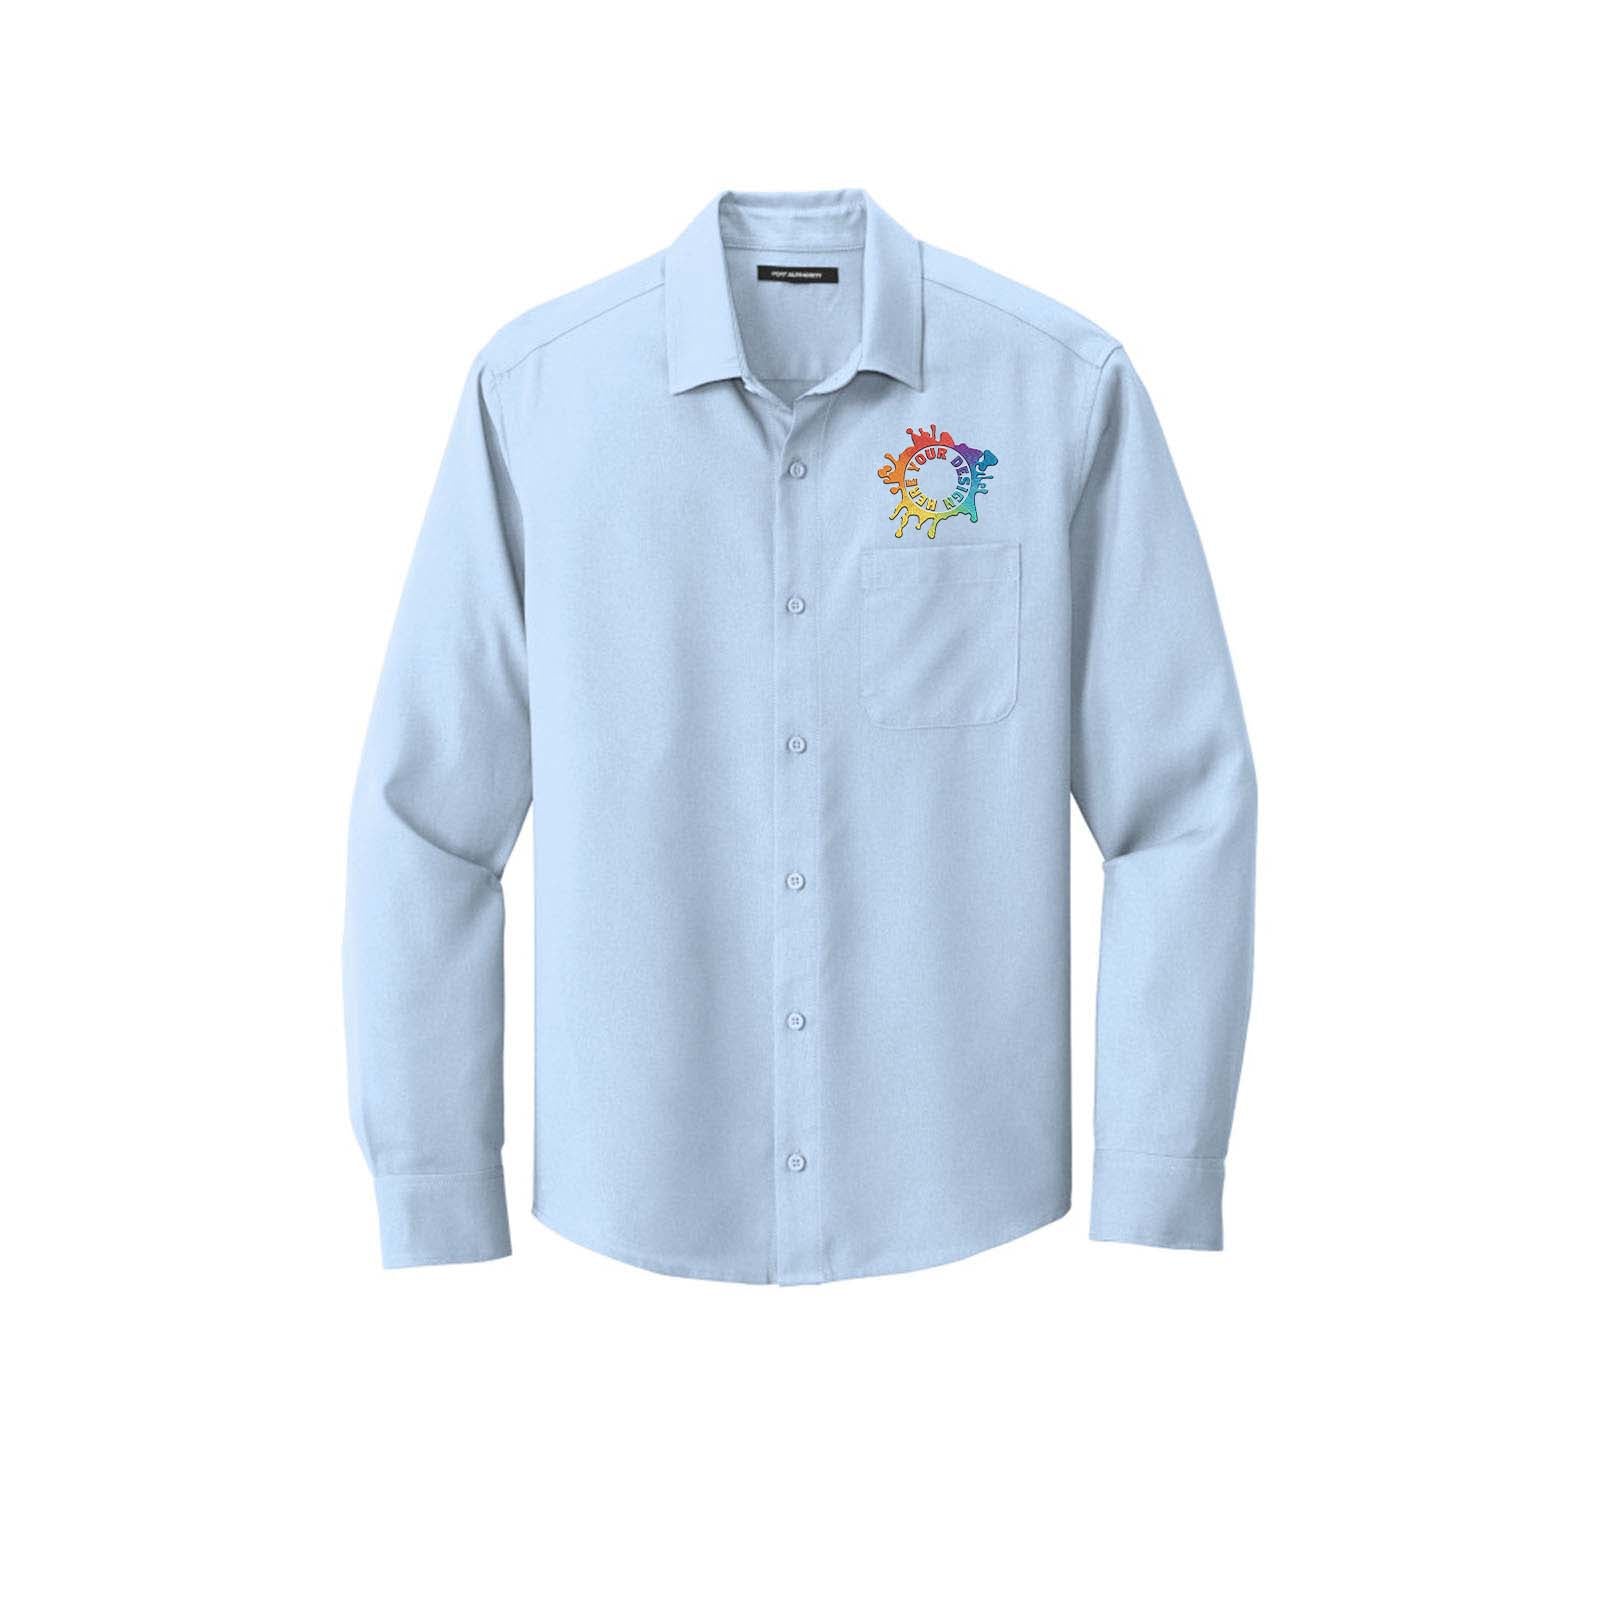 Port Authority ® Long Sleeve Performance Staff Shirt Embroidery - Mato & Hash